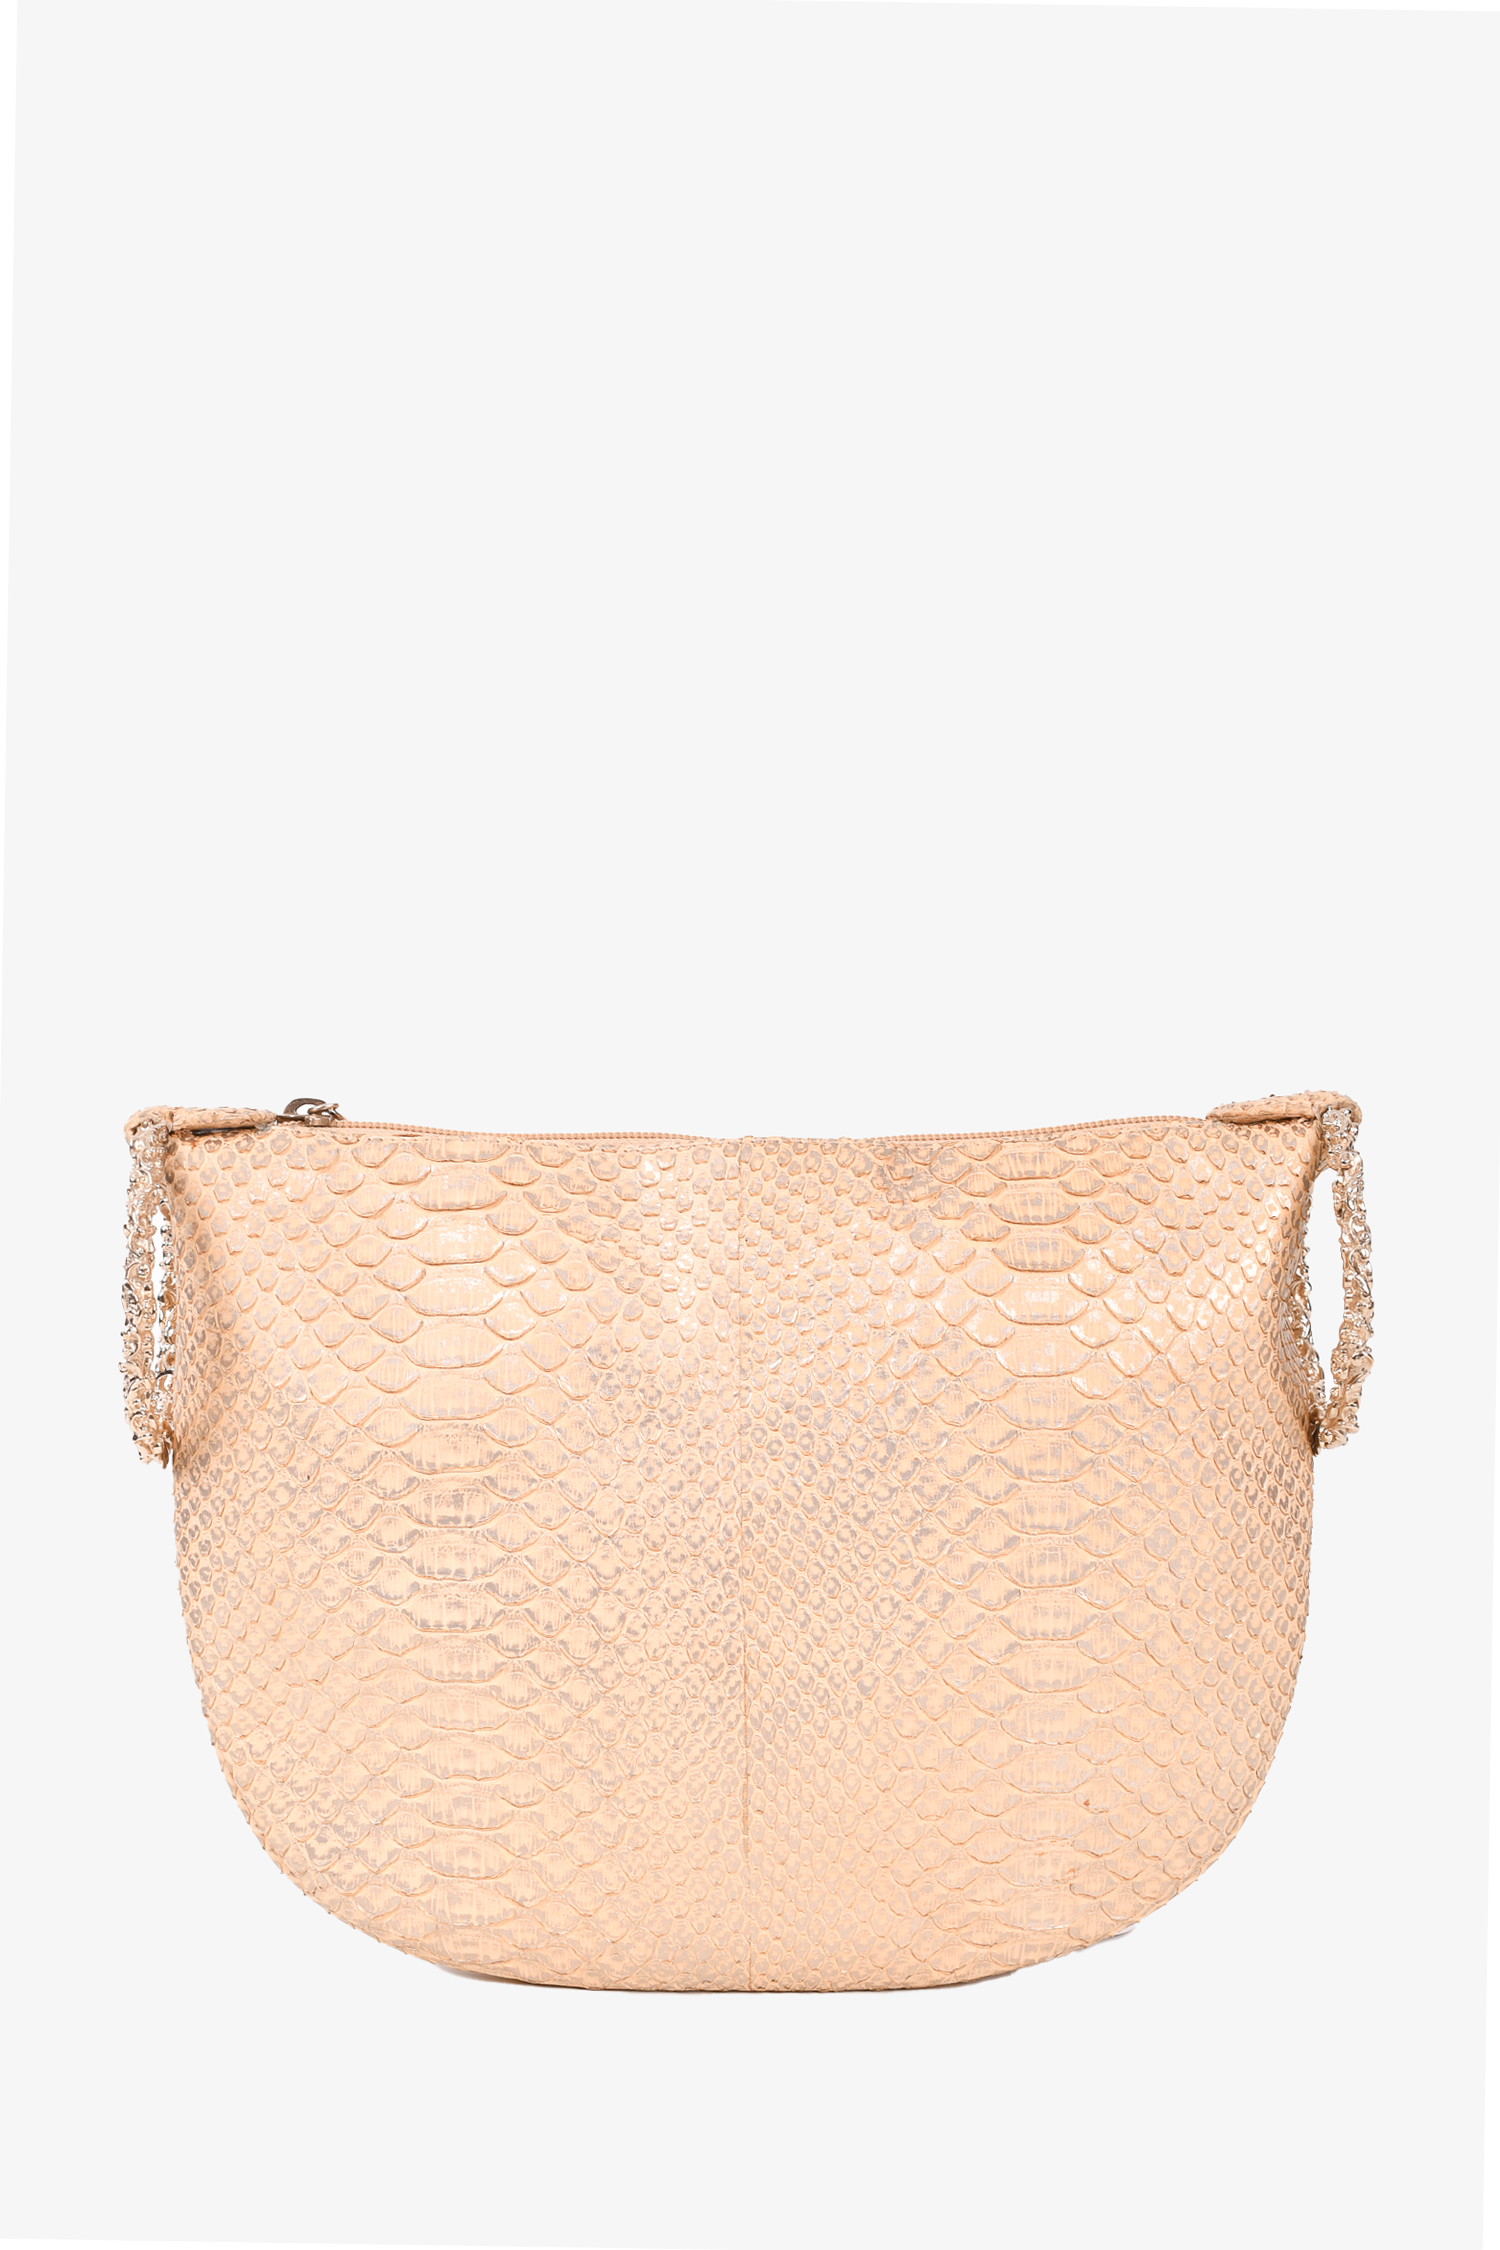 Chanel 2012/13 Gold Python Leather Fortune Cookie Clutch Bag – Mine & Yours